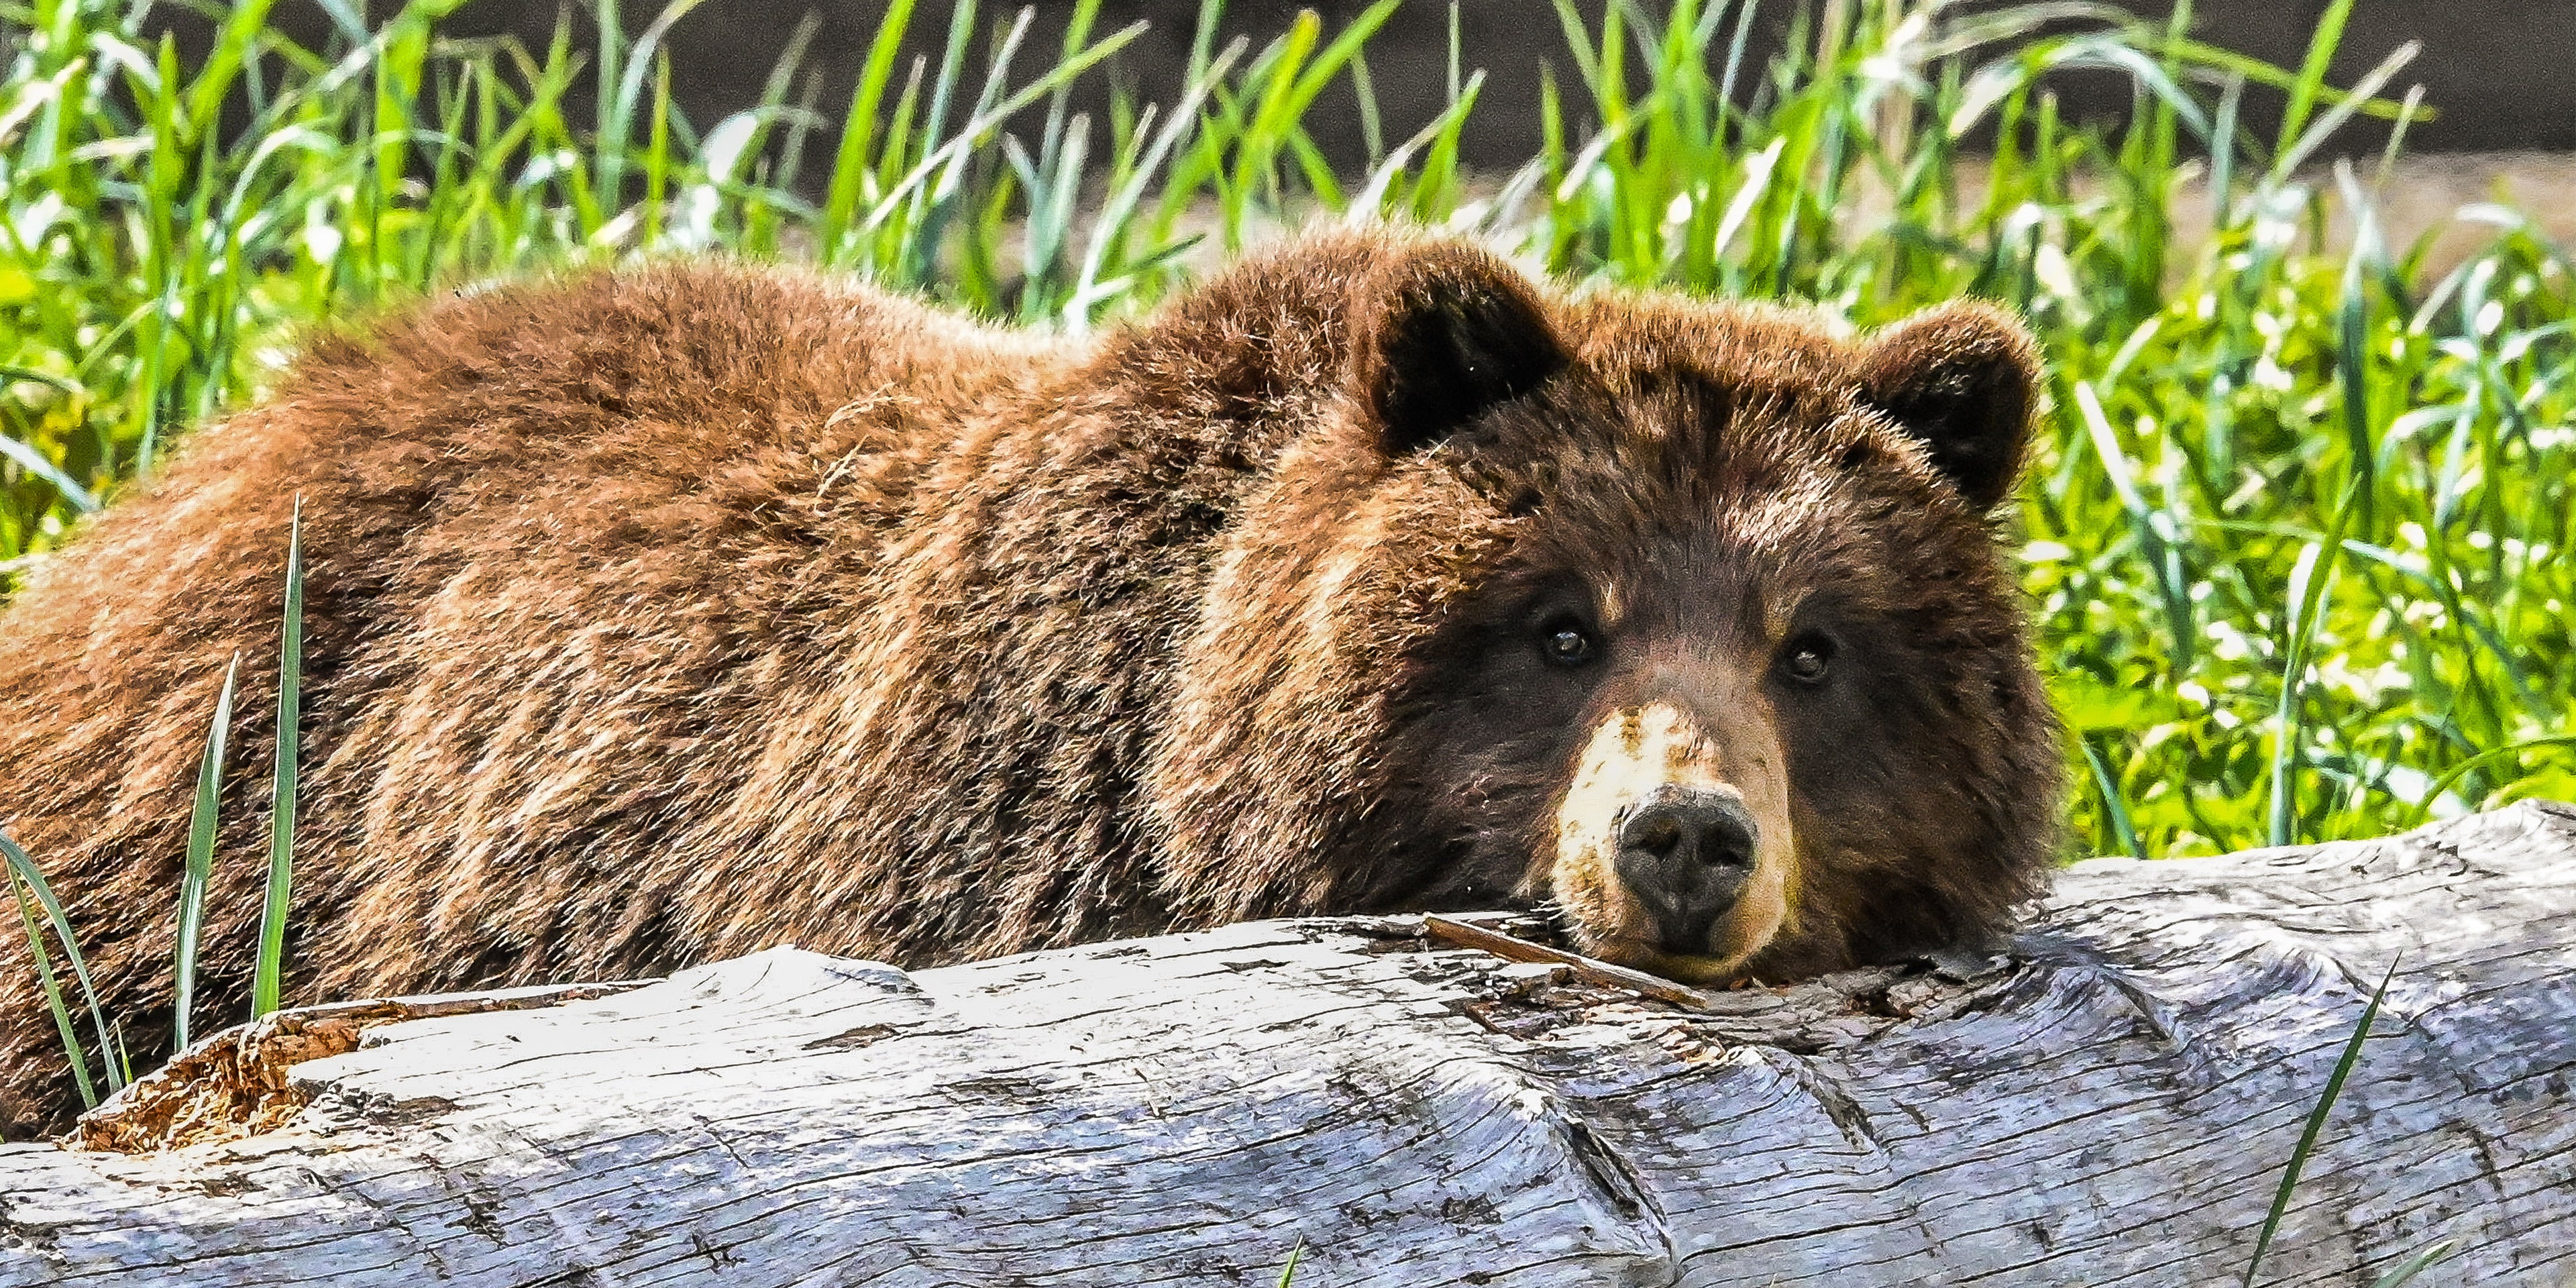 A picture of a brown bear resting its head on a log.